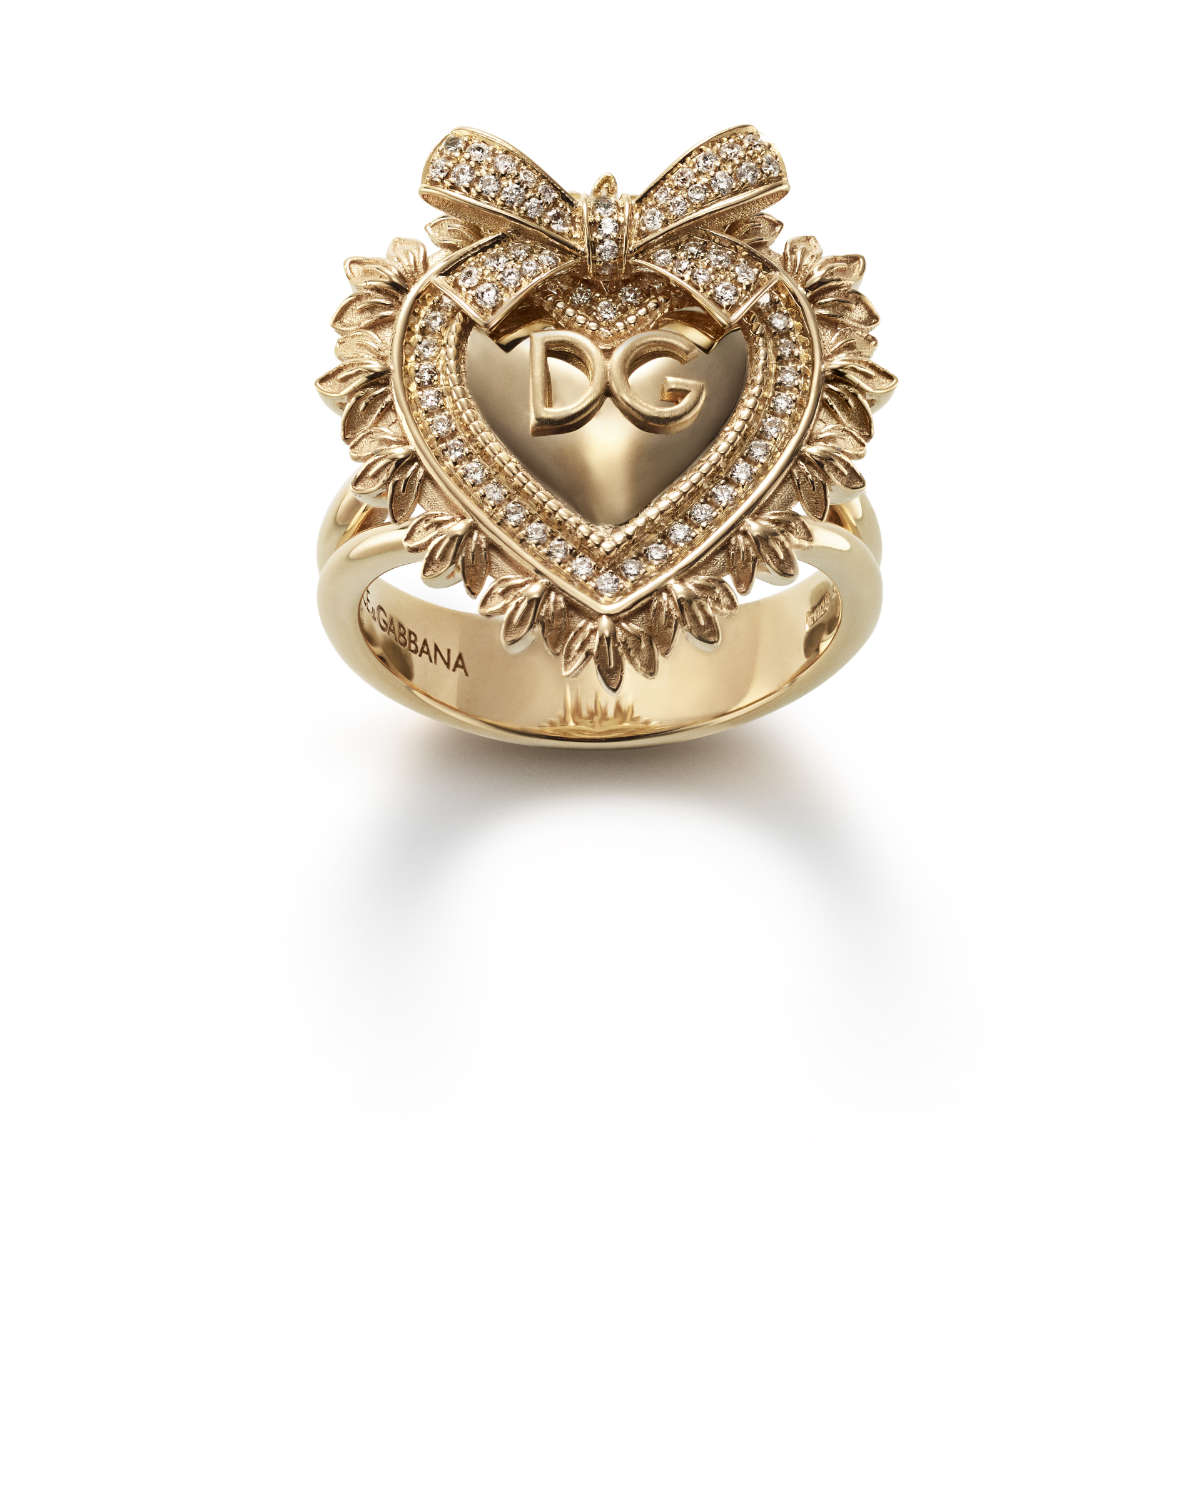 Dolce&Gabbana Presents The New Devotion Fine Jewellery Collection